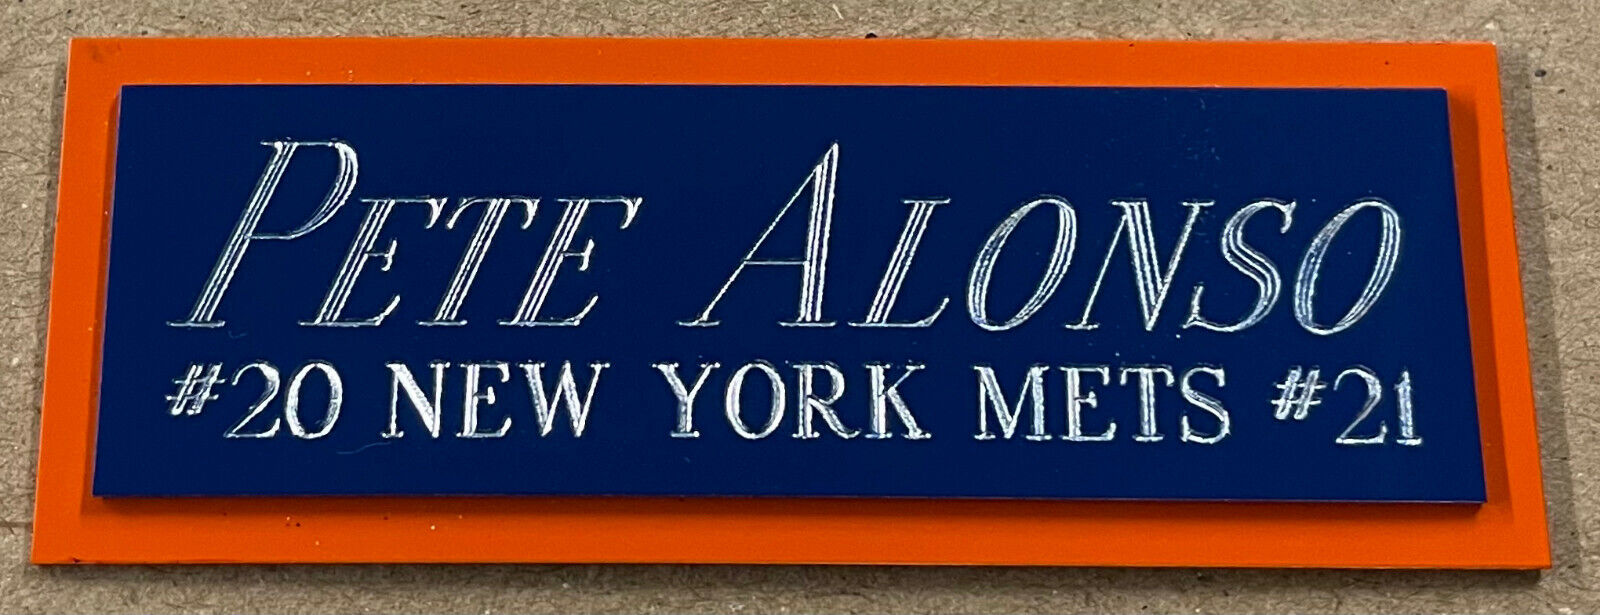 PETE ALONSO NY METS NAMEPLATE FOR AUTOGRAPHED Signed Baseball Display CUBE CASE